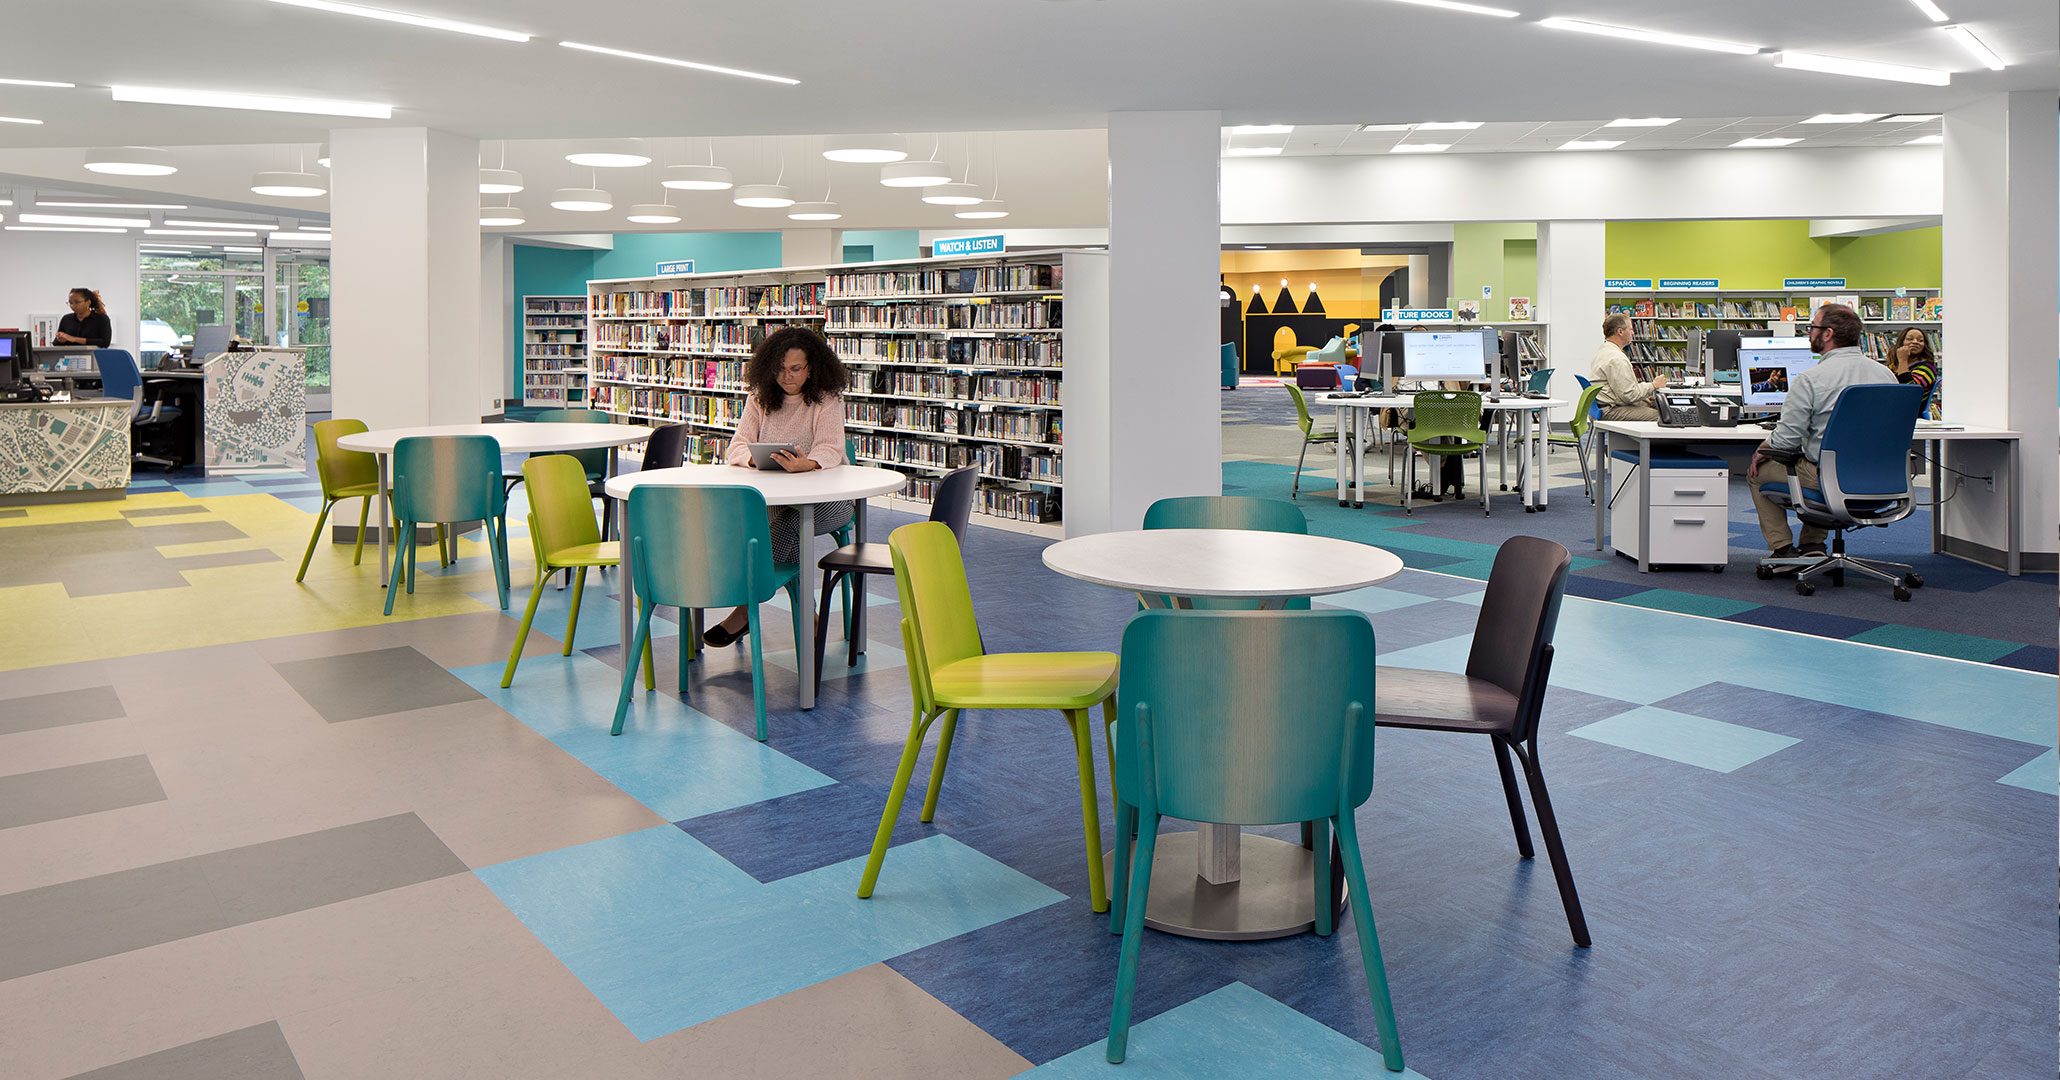 Boudreaux architects worked with the Richland Library to design the interiors at the Richland Library Northeast Branch Location. The colorful interior welcomes the community.